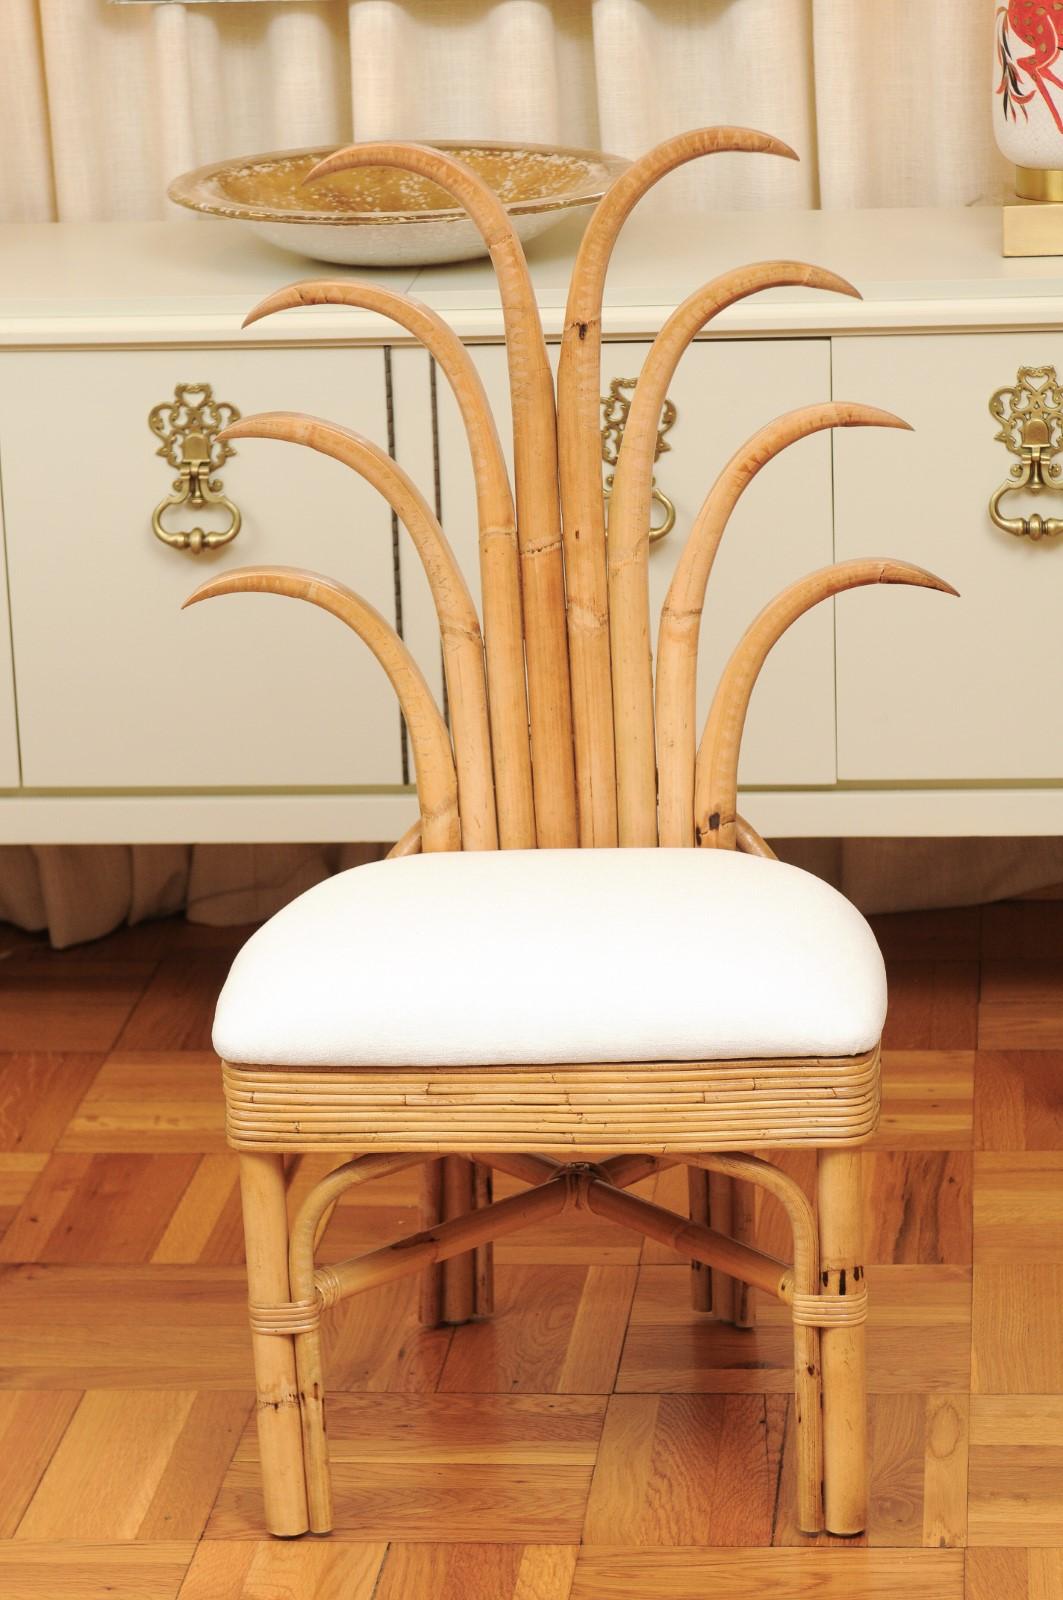 Exquisite Set of 12 Rattan and Cane Palm Frond Dining Chairs, circa 1950 In Excellent Condition For Sale In Atlanta, GA